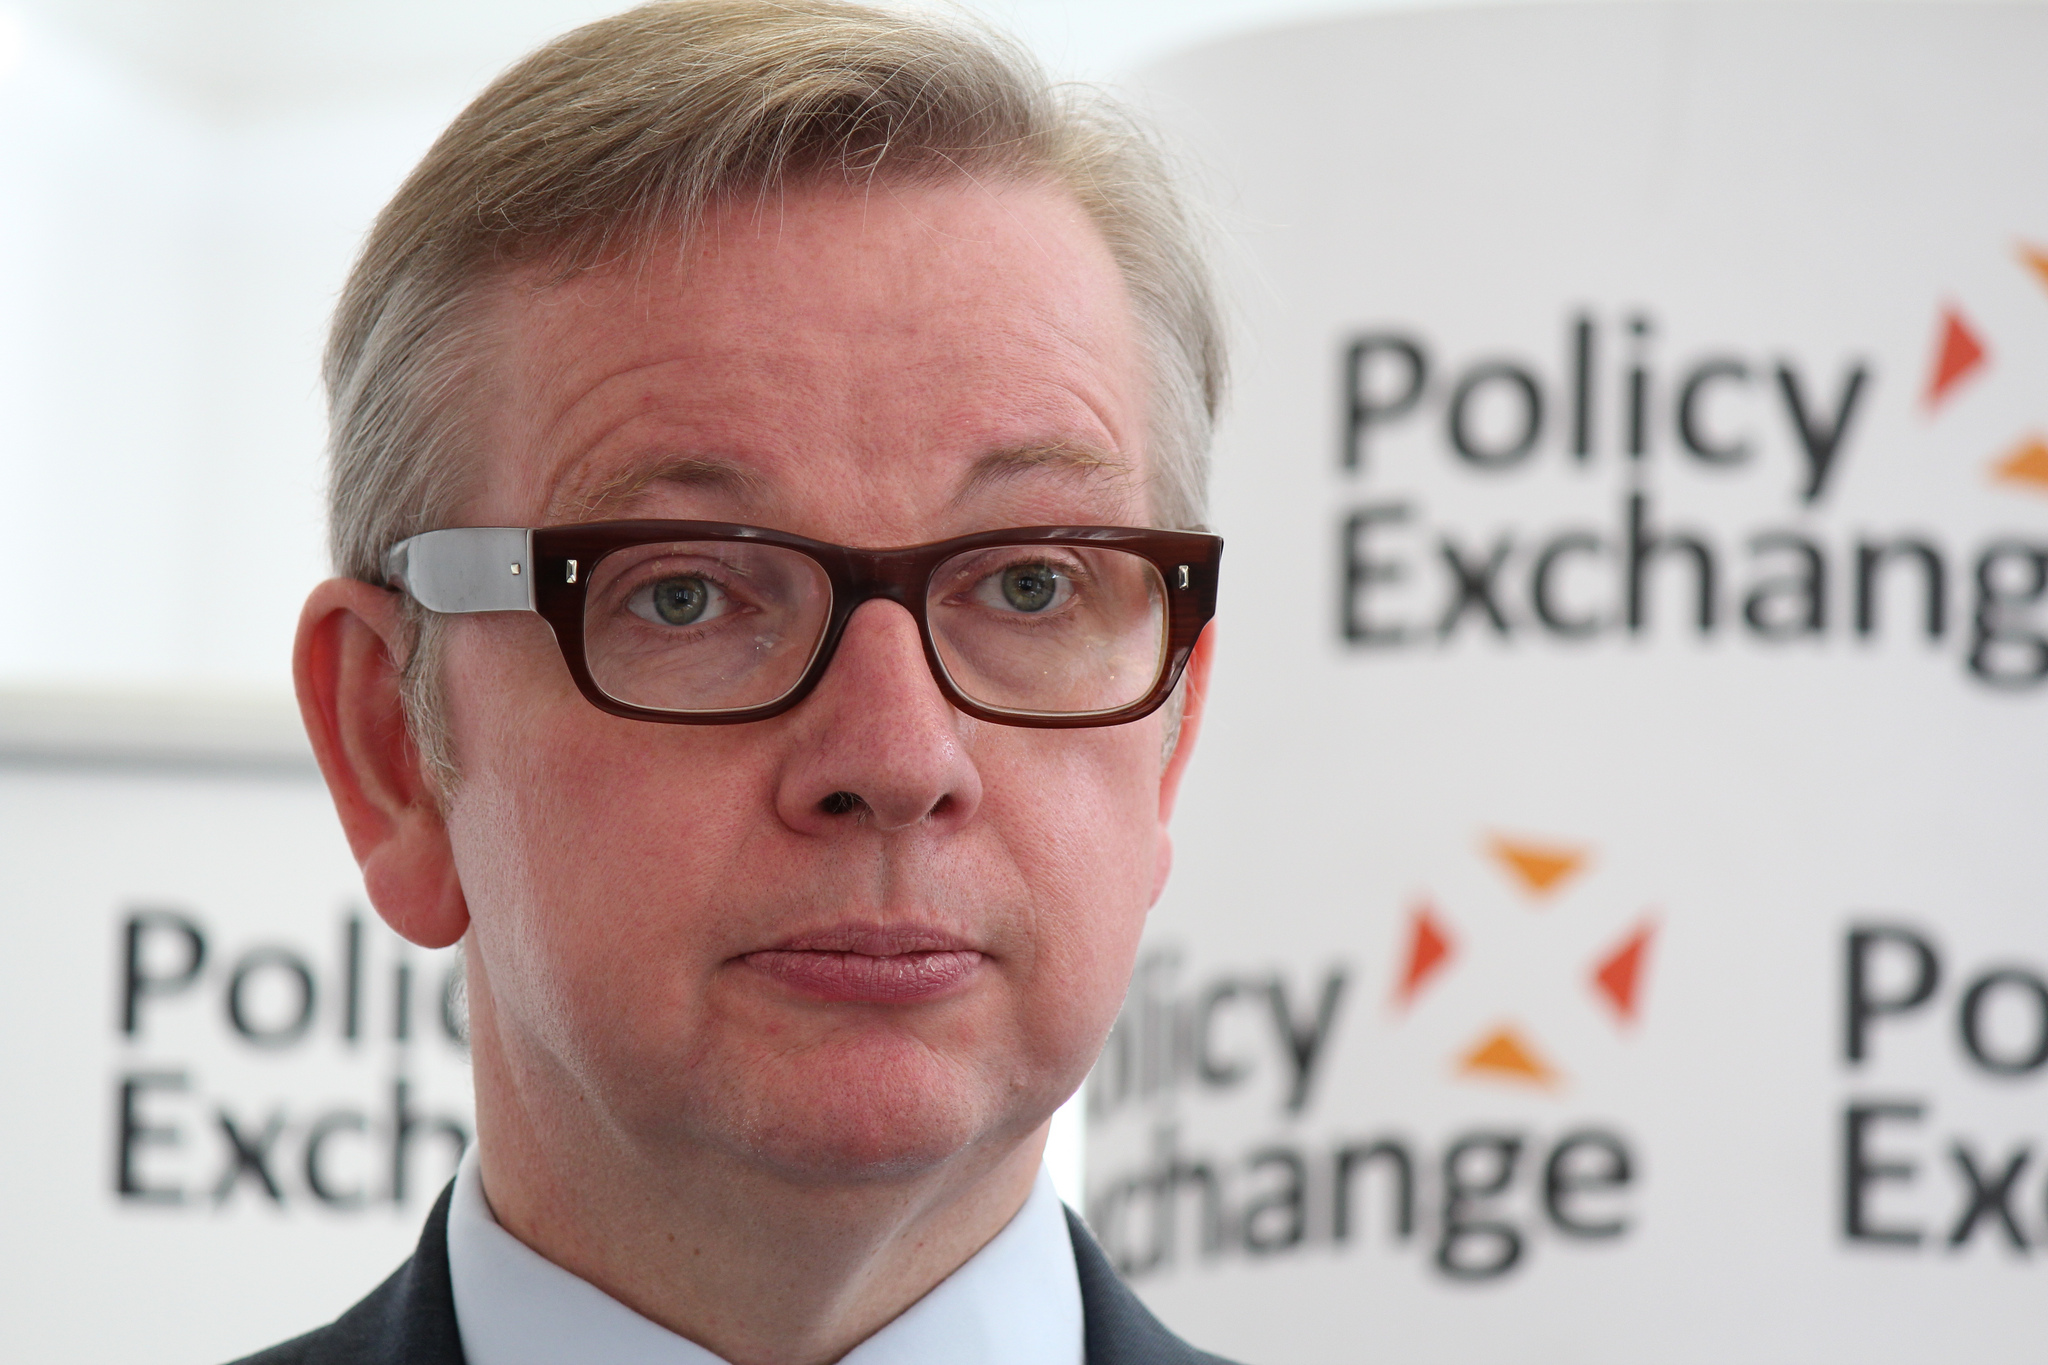 Michael Gove speaking at Policy Exchange